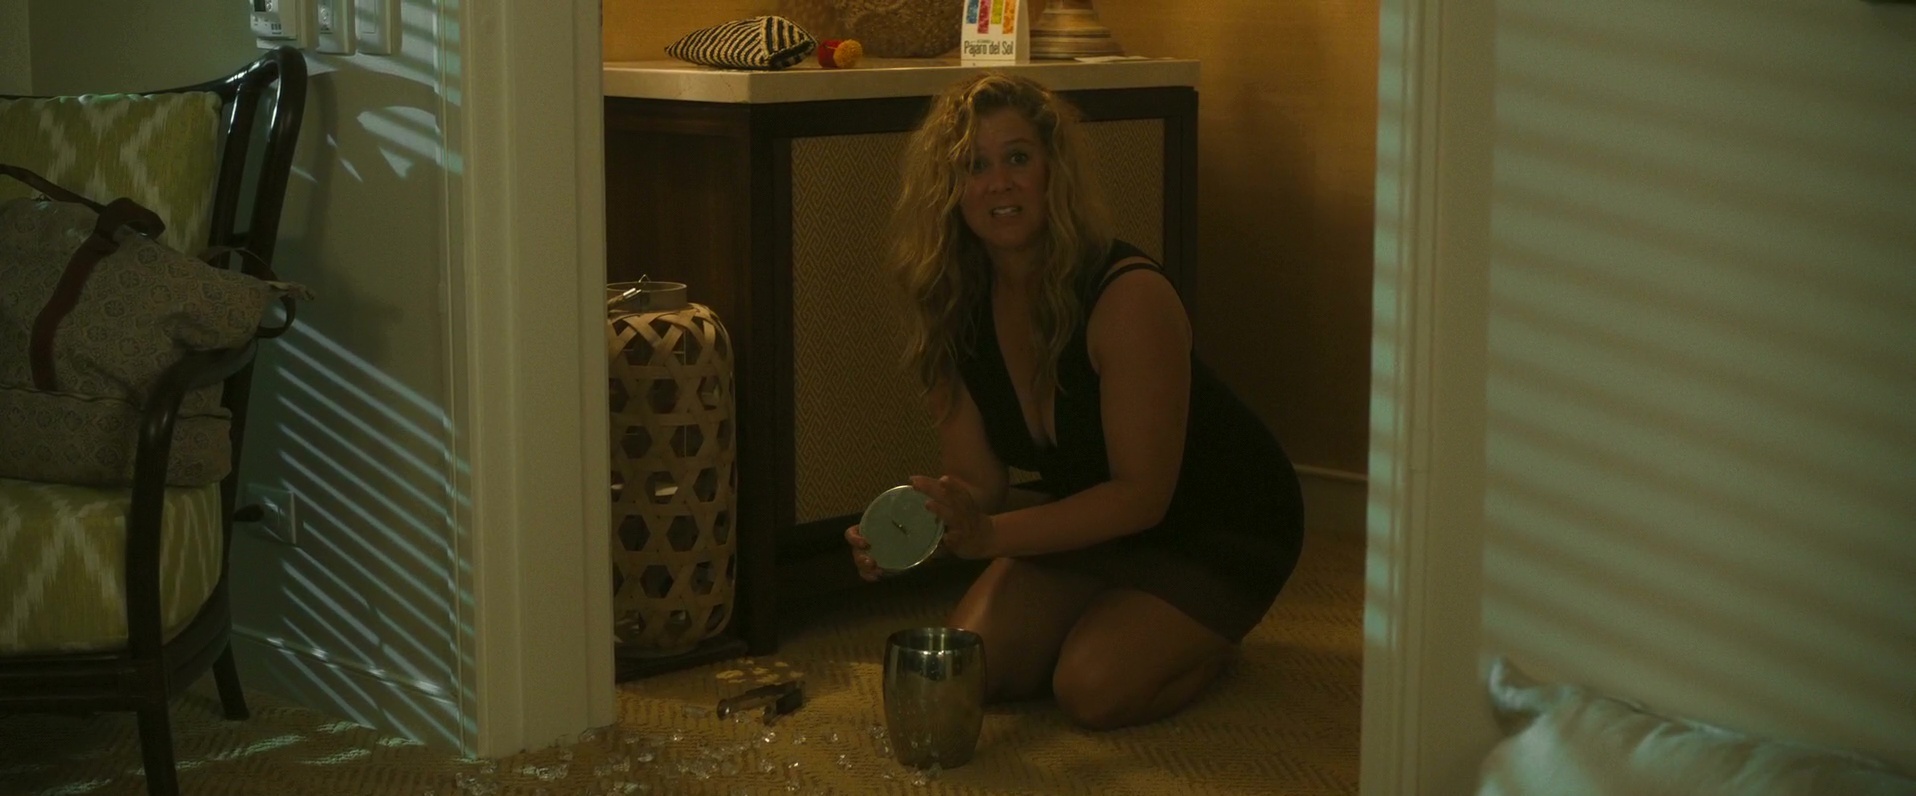 Snatched nudity amy schumer Review: Amy